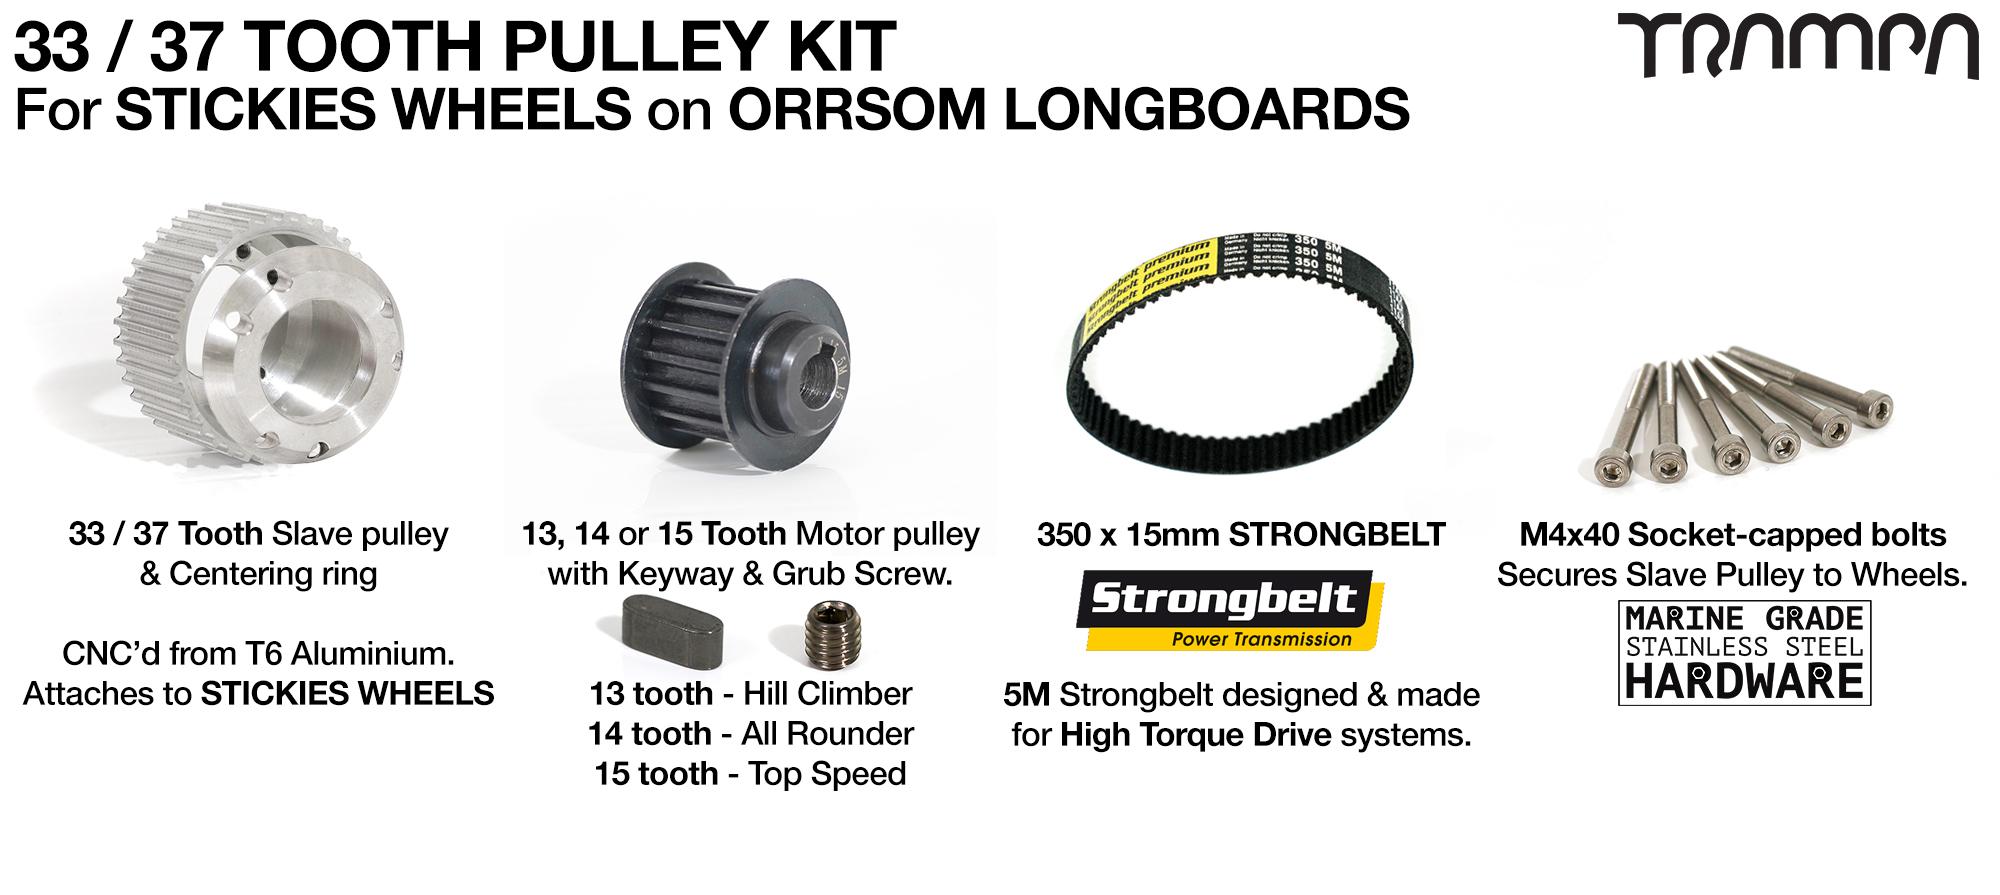 ORRSOM Longboard 33/37 Tooth Pulley Kit with 330mm x 15mm Belt for STICKIES Wheels